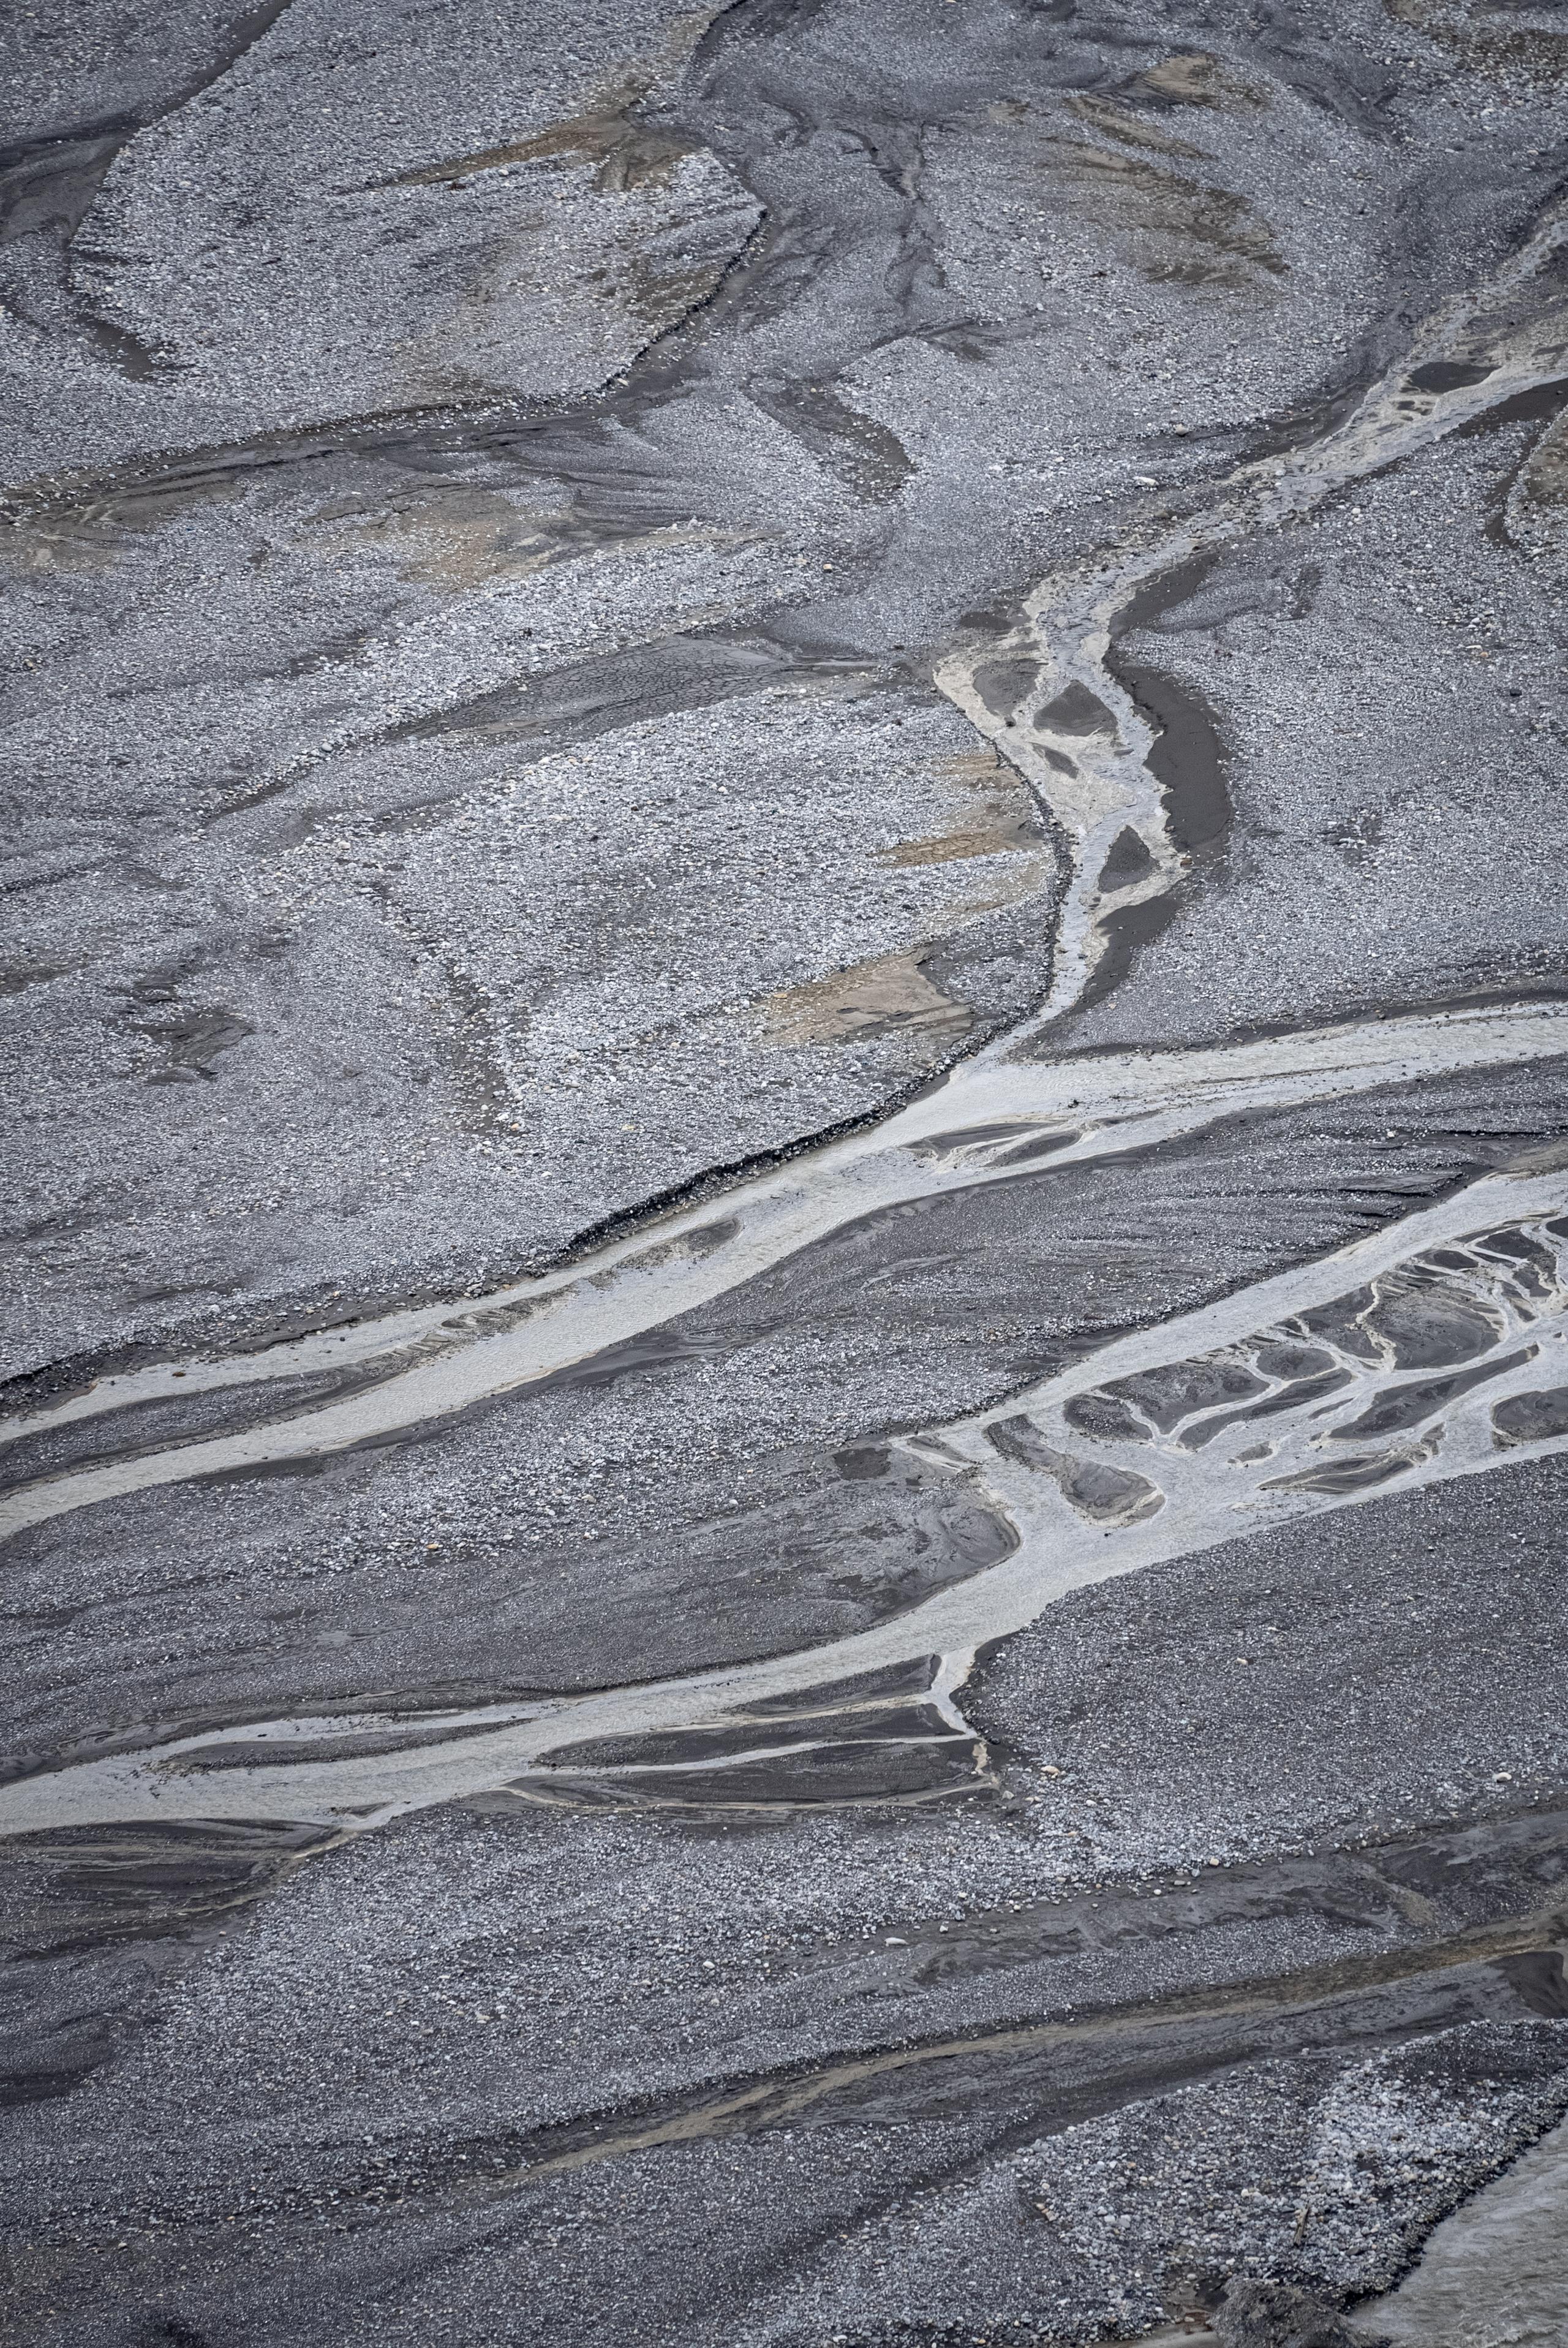 Textured detail of braided river in Nepal